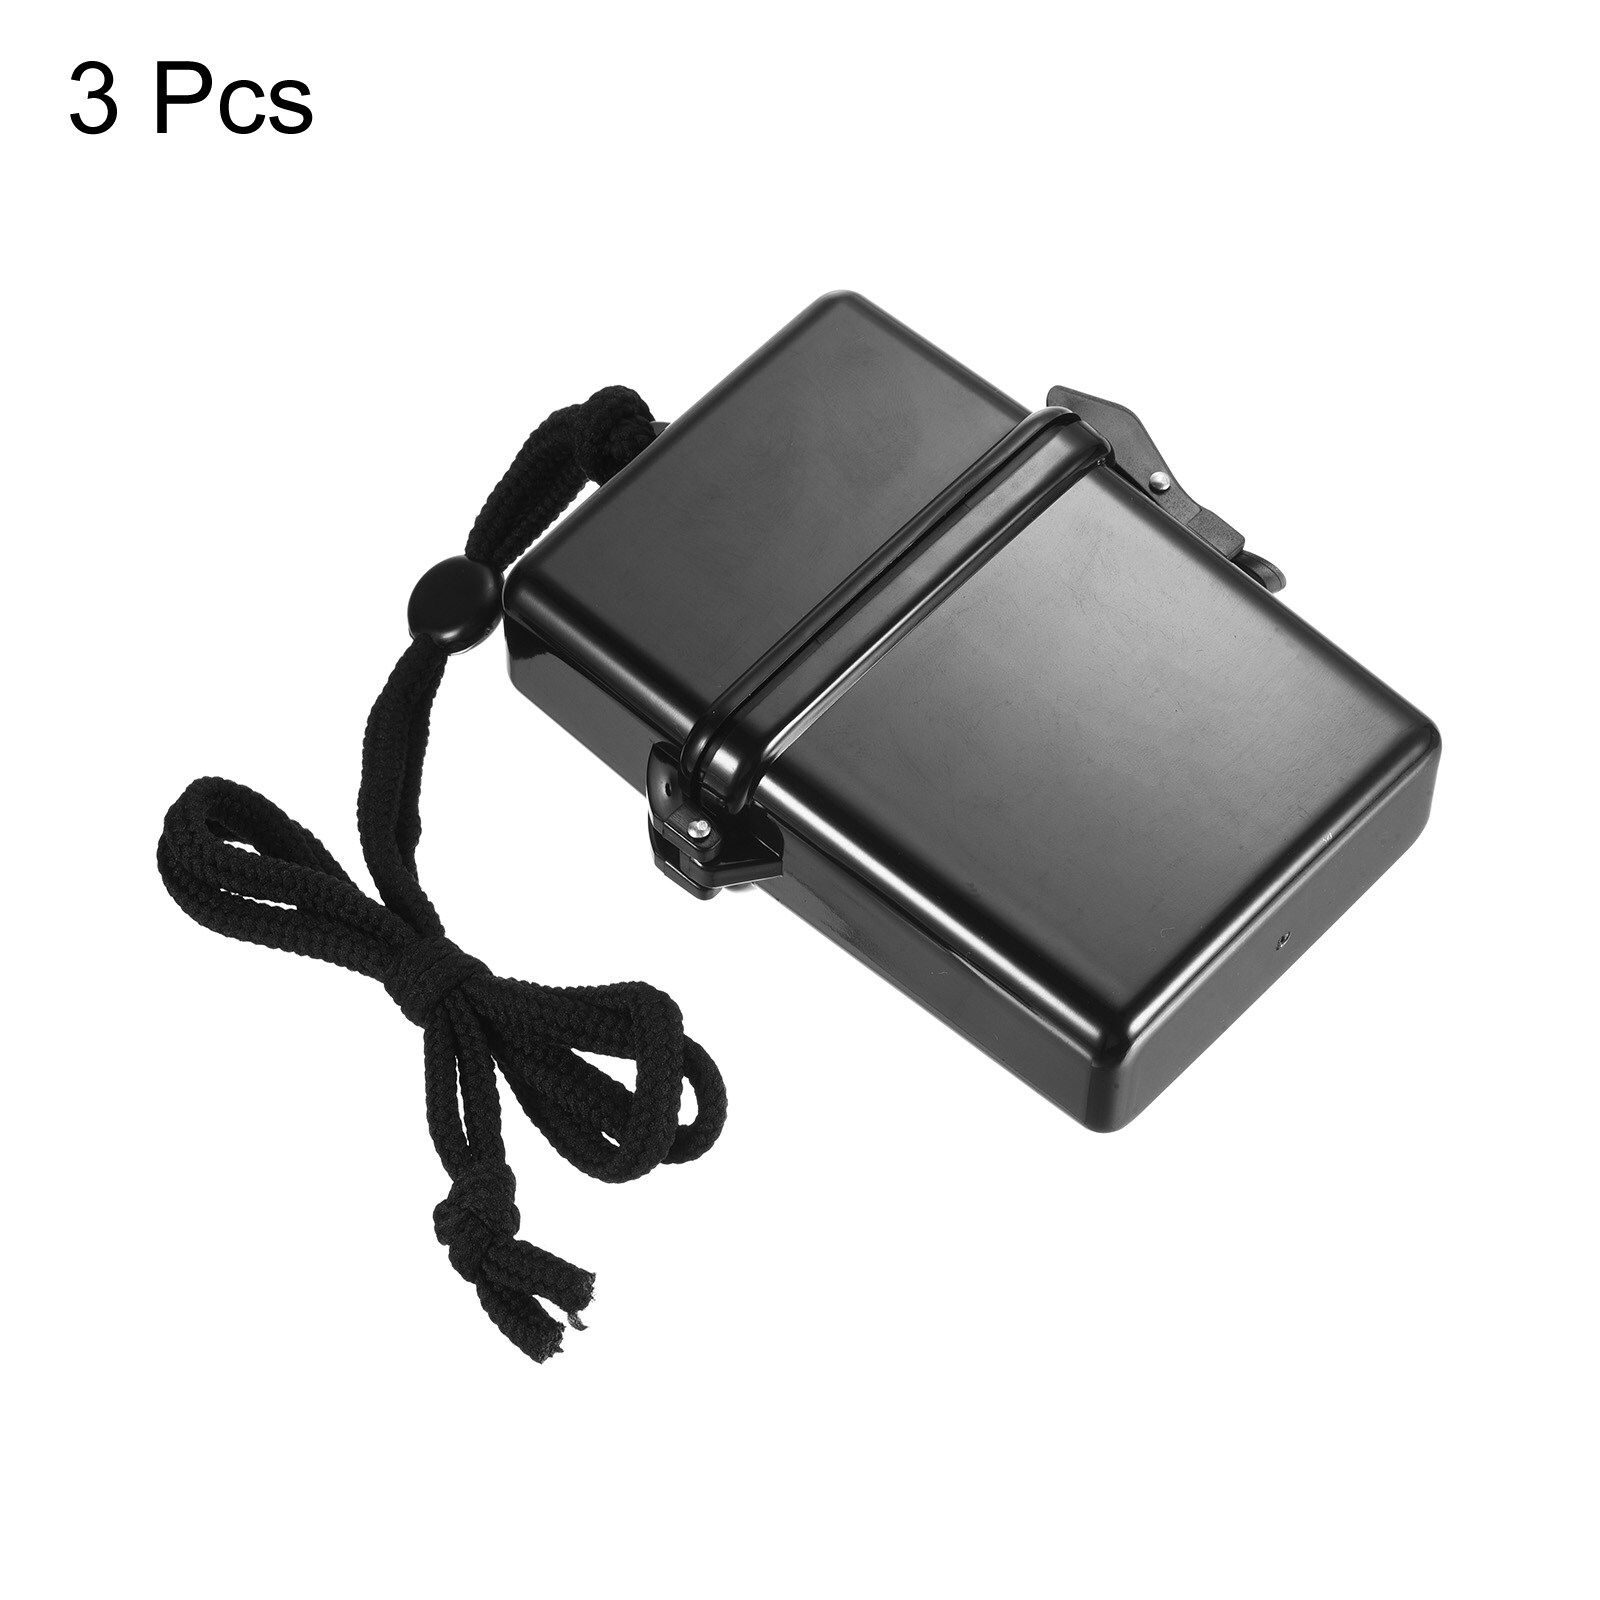 3pcs Waterproof ID Card Badge Holder Floating Sports Case with